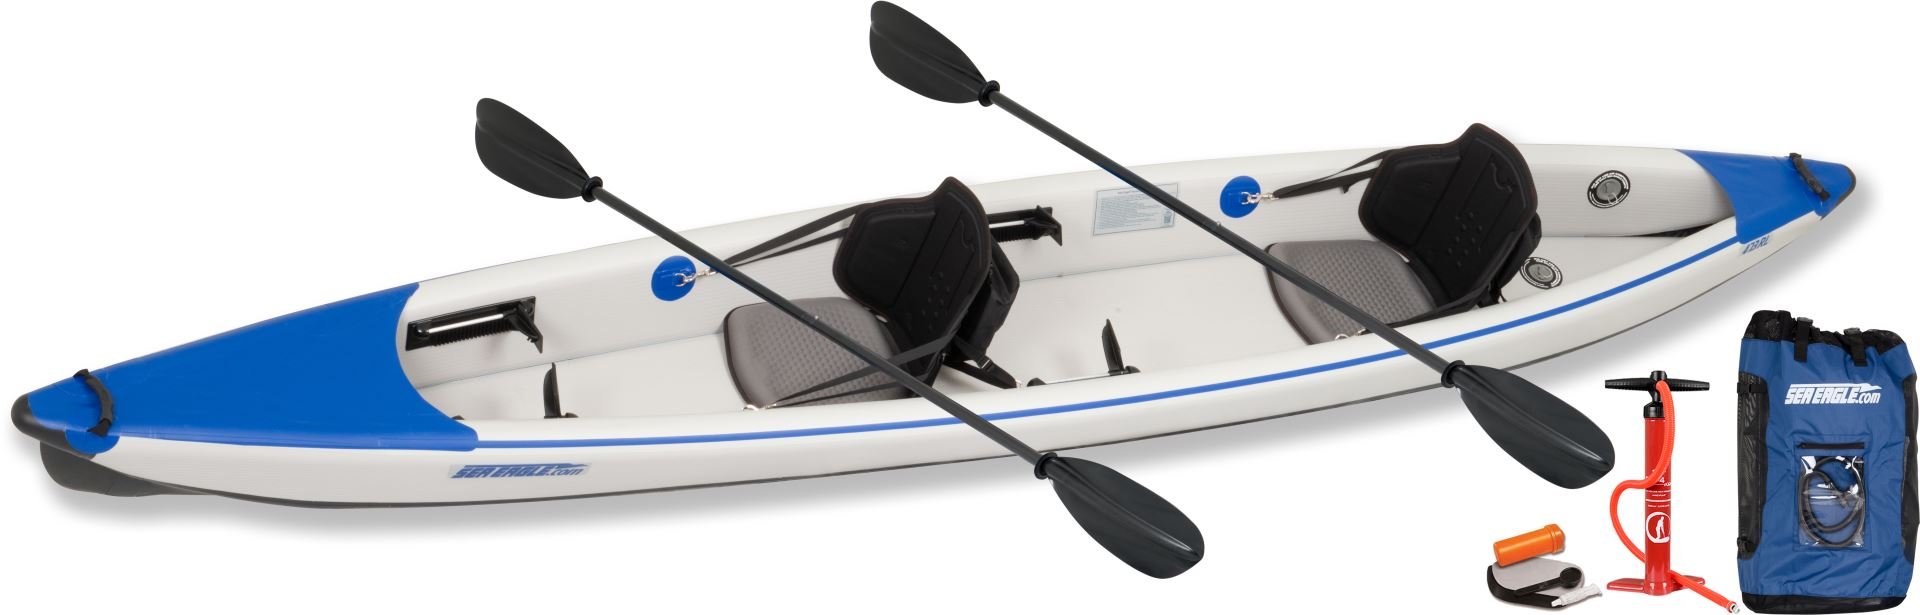 473RL Sea Eagle Razor Lite Inflatable Kayak Pro Carbon Tandem Package - Sunzout Outdoor Spaces LLC